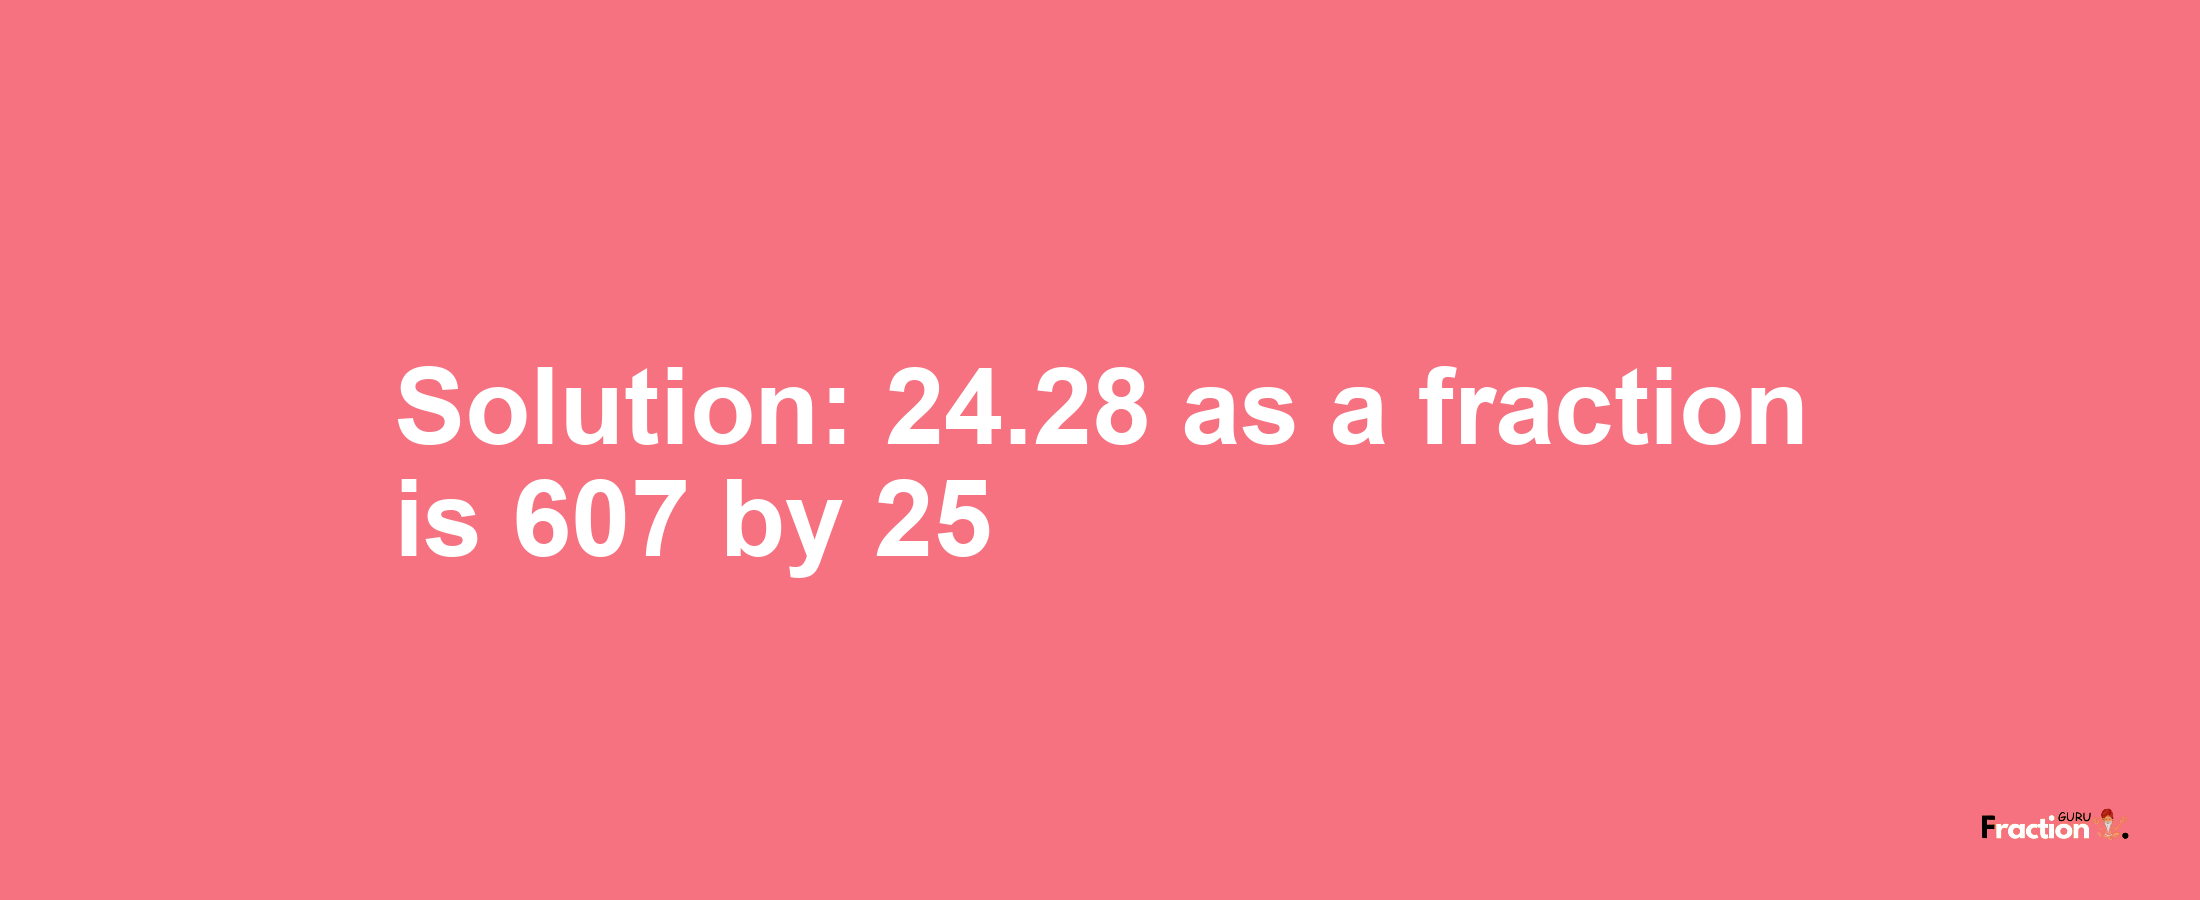 Solution:24.28 as a fraction is 607/25